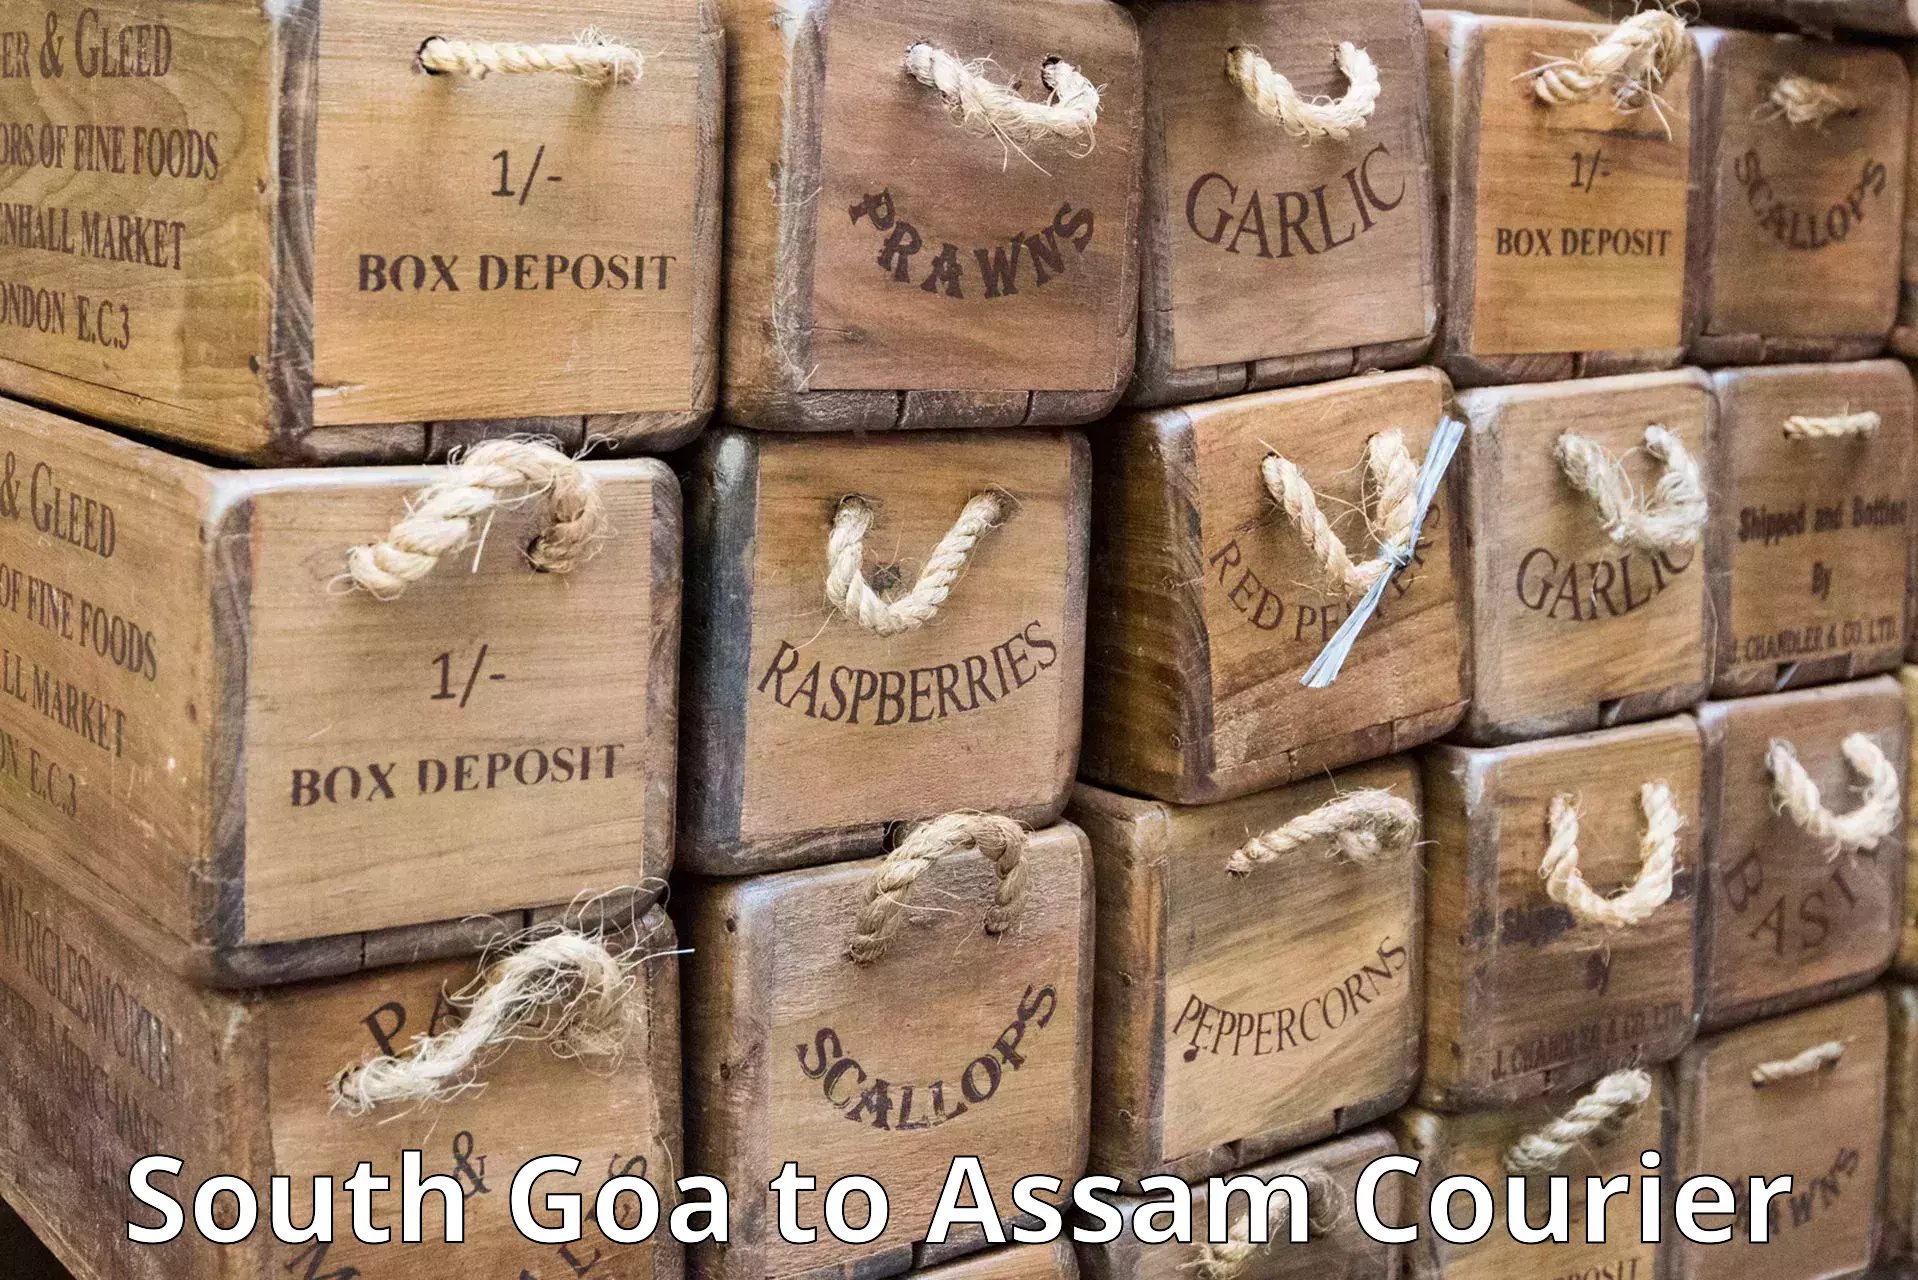 Courier tracking online South Goa to Majuli